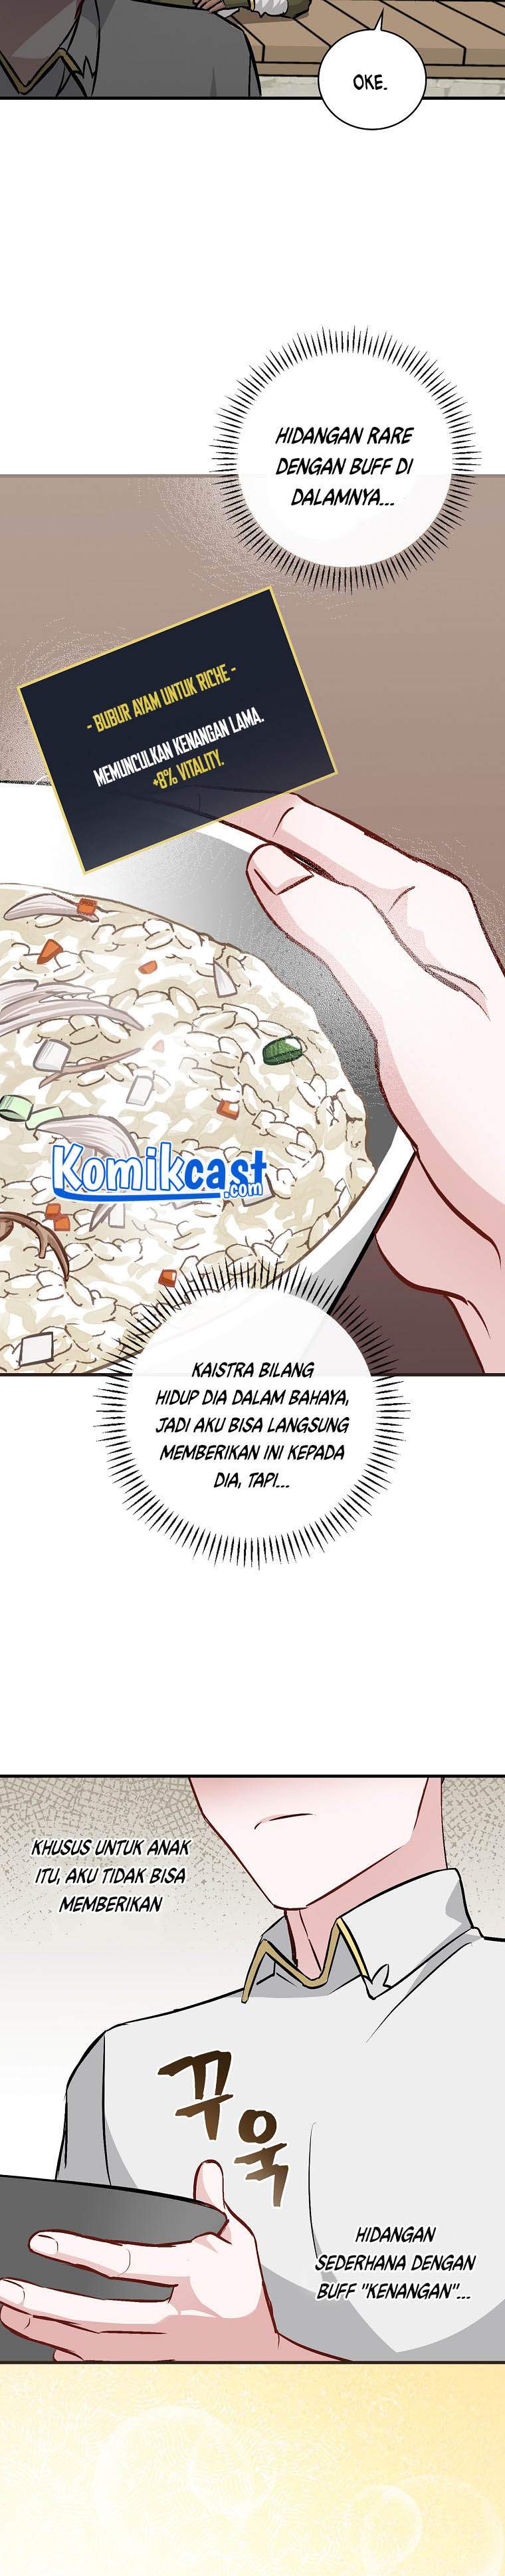 Leveling Up, by Only Eating! Chapter 82